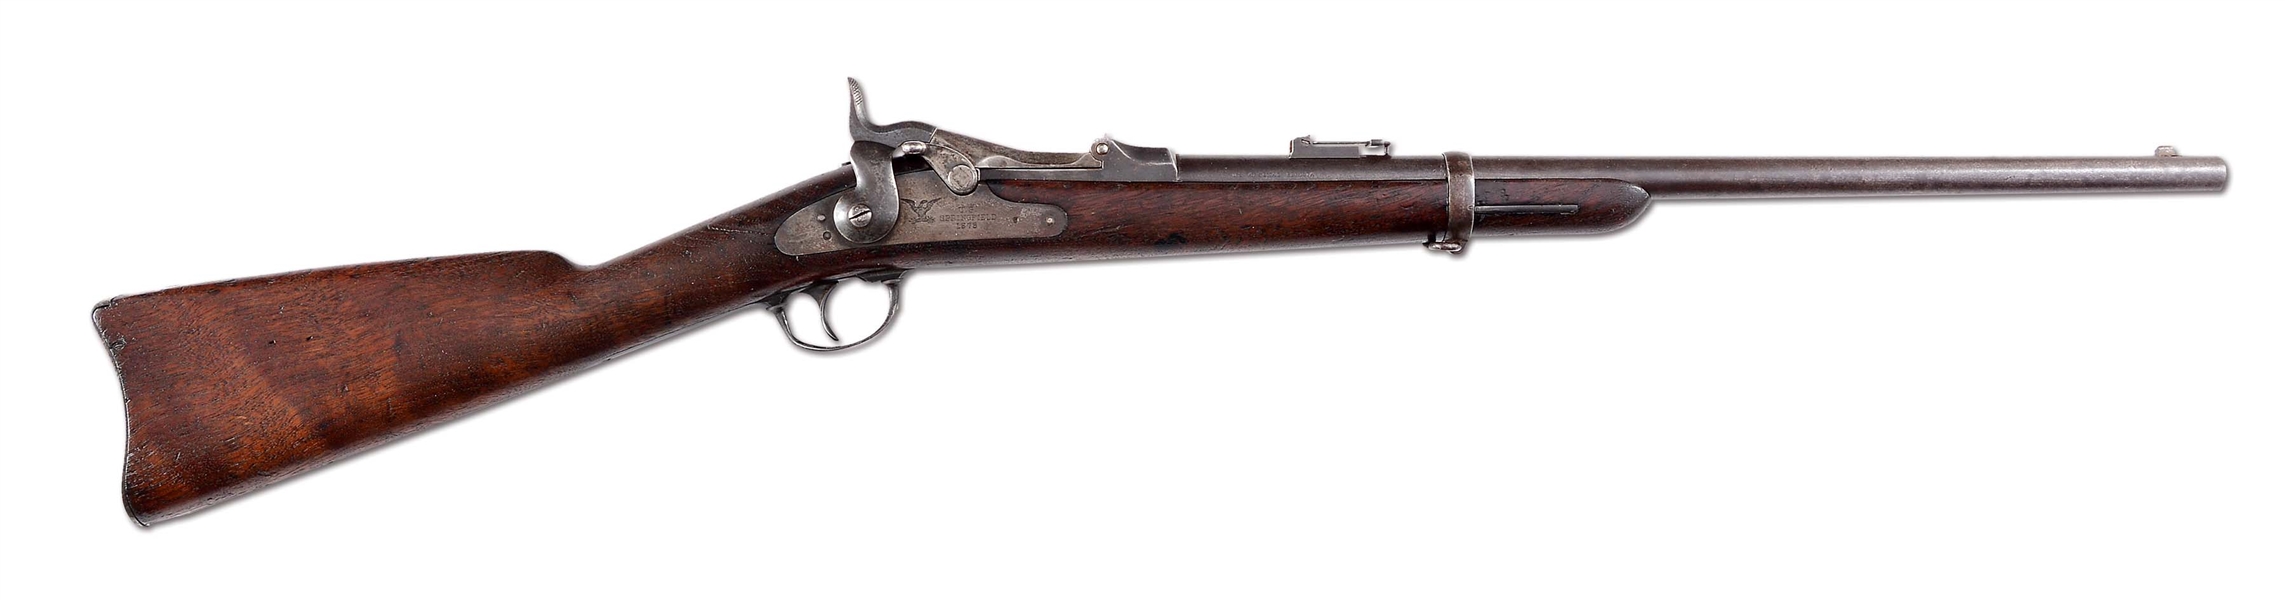 (A) EXPERIMENTAL SPRINGFIELD MODEL 1873 TRAPDOOR CARBINE WITH DUAL EXTRACTOR SYSTEM.